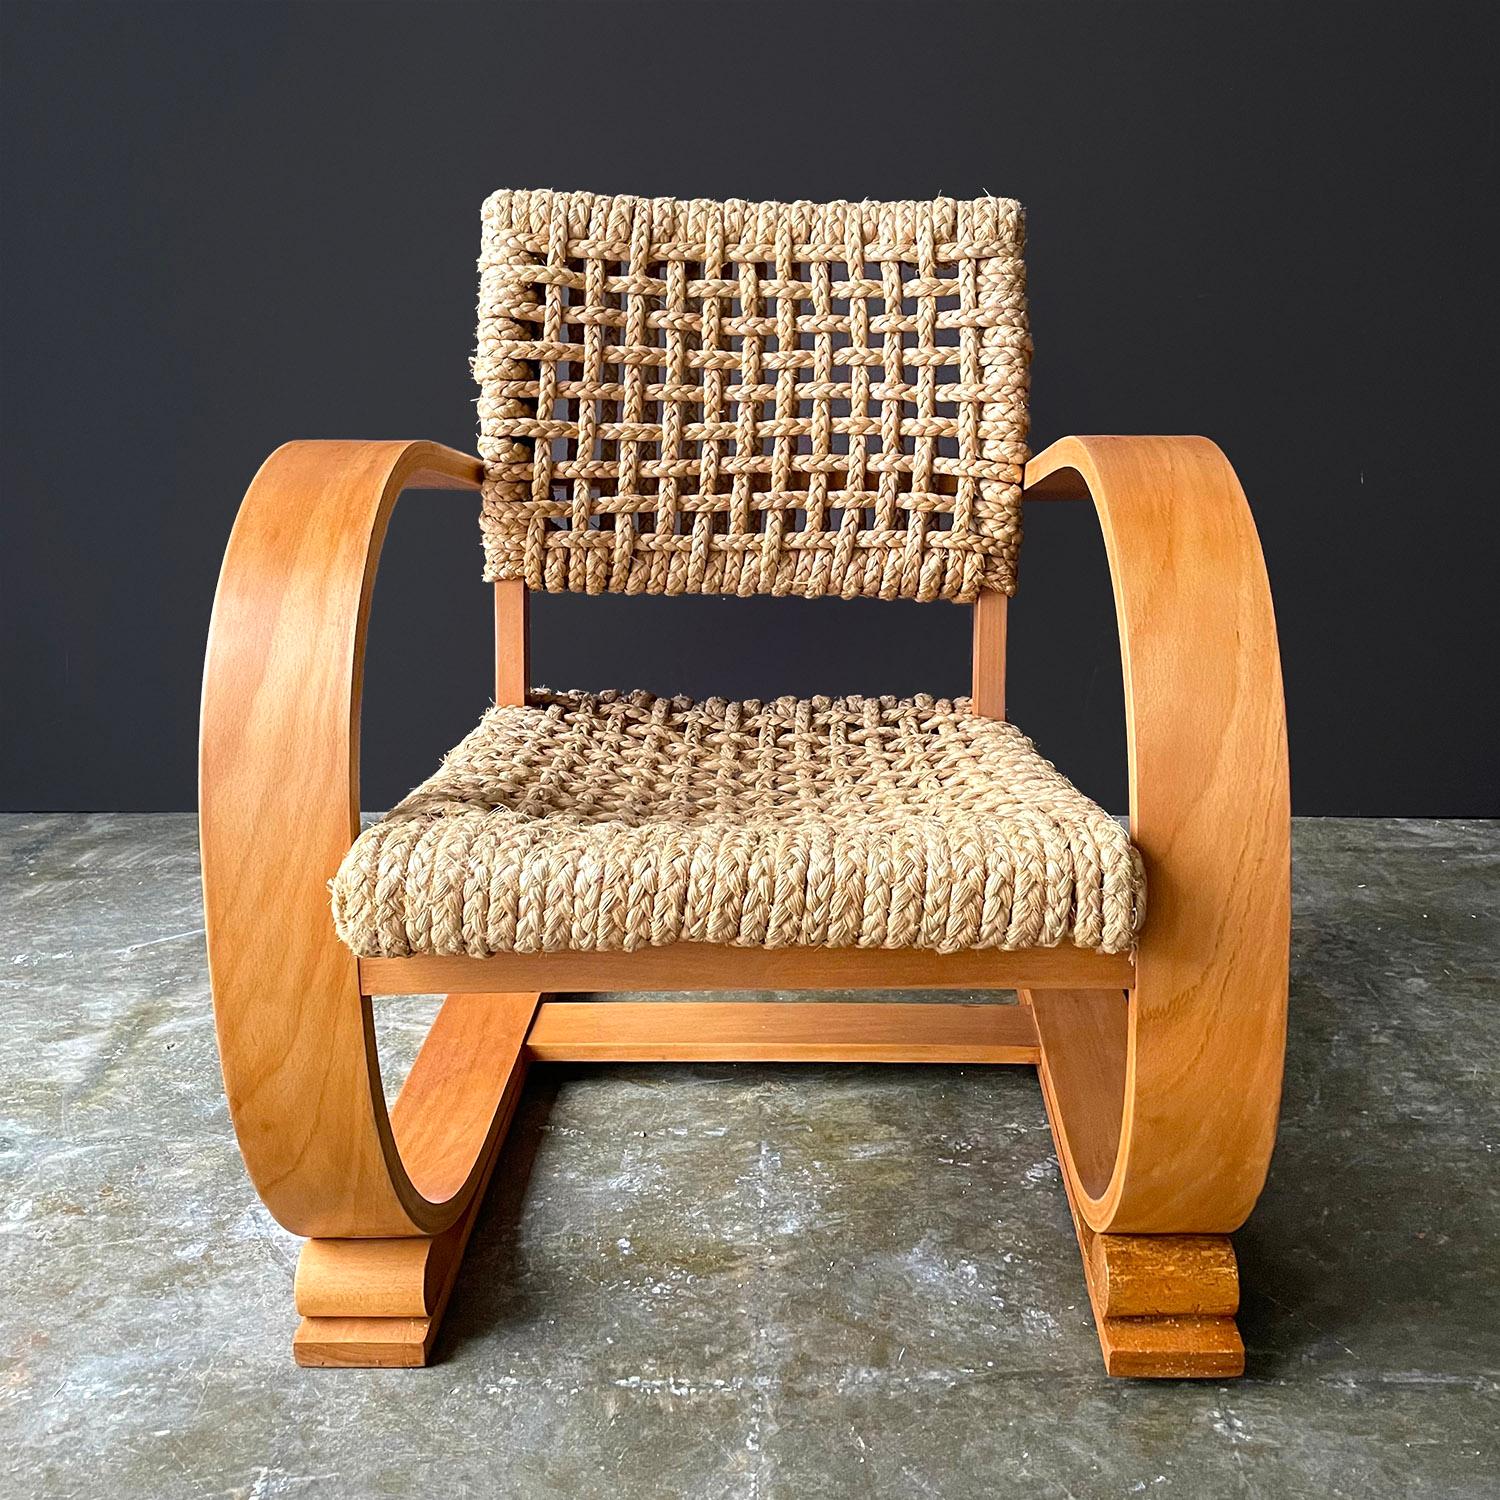 Adrien Audoux & Frida Minet low slung rope chairs
France, circa 1950’s
Bentwood cantilevered frames with braided rope seats and back rests
Sold as a pair
Wear consistent with age and use. 
Wood in good vintage condition with minor imperfections